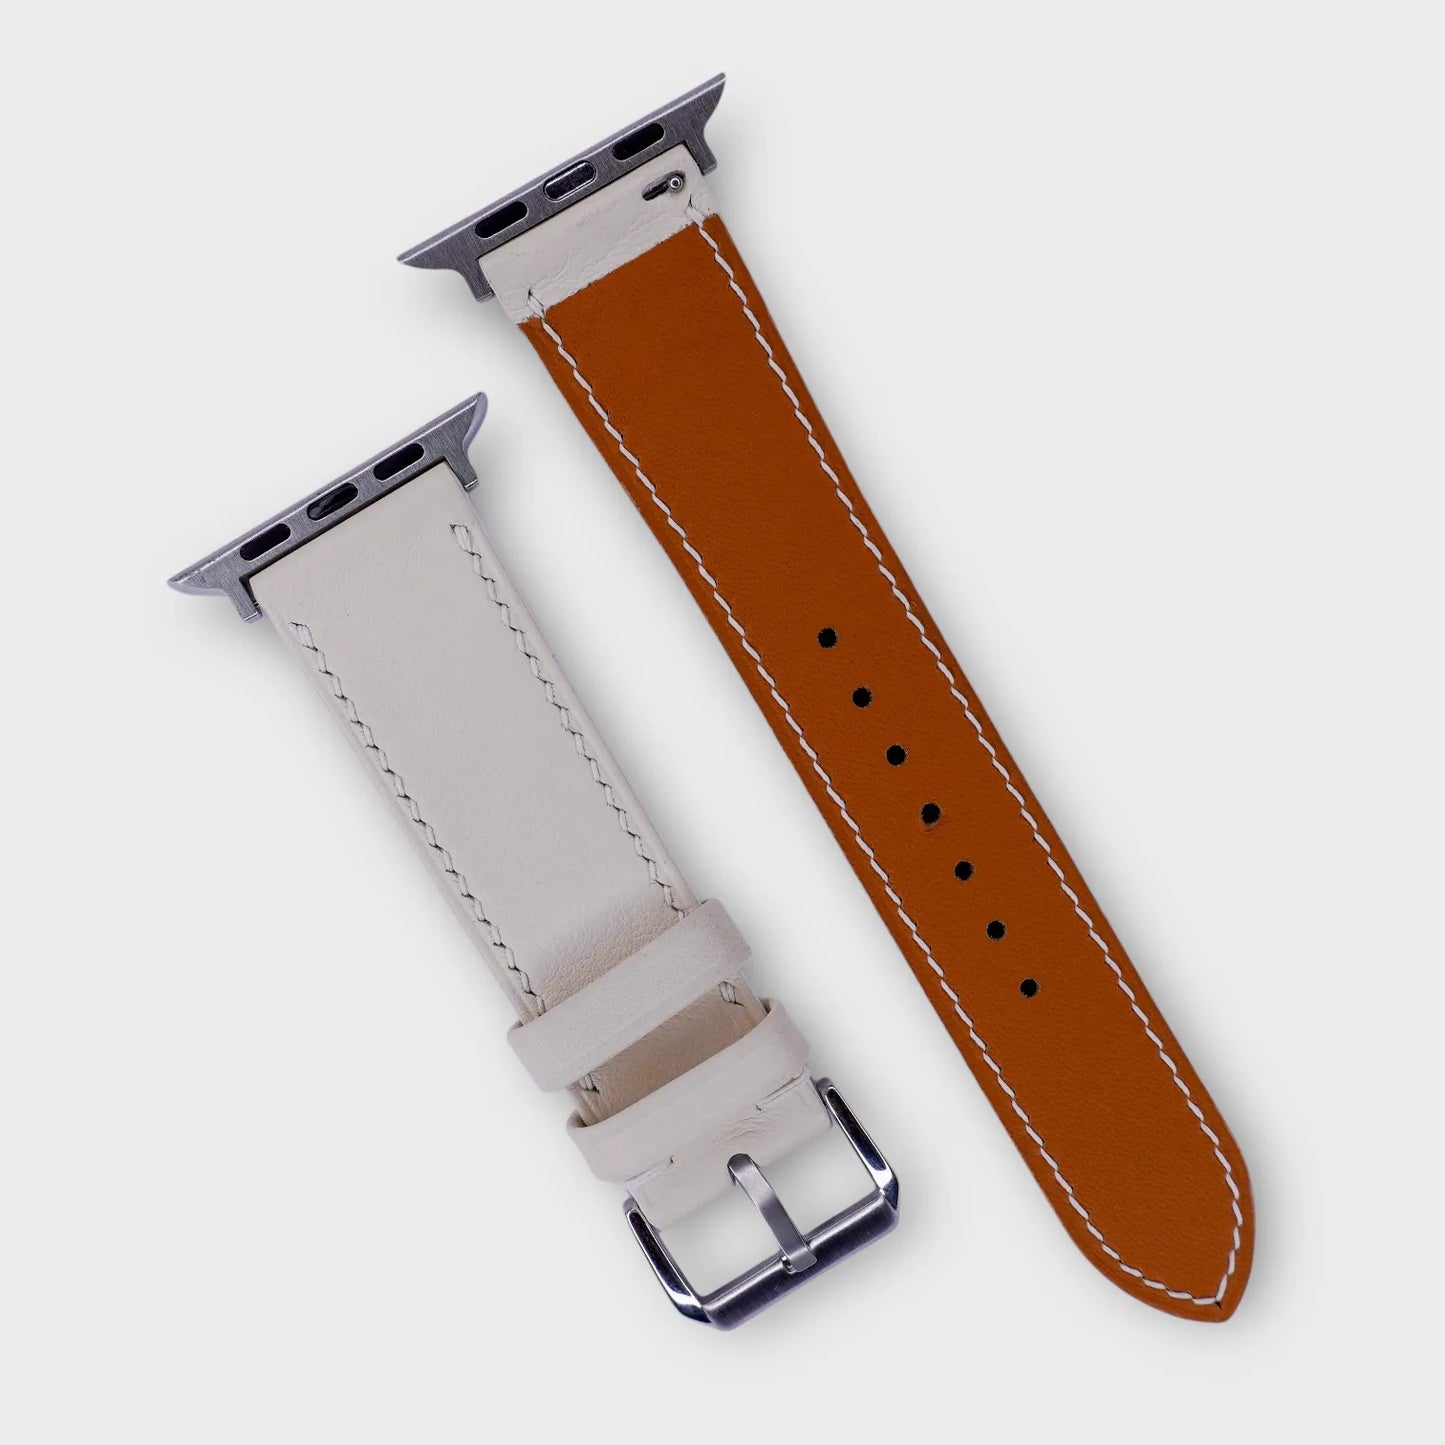 Durable leather watch straps in white French Swift leather, crafted with meticulous attention to detail.